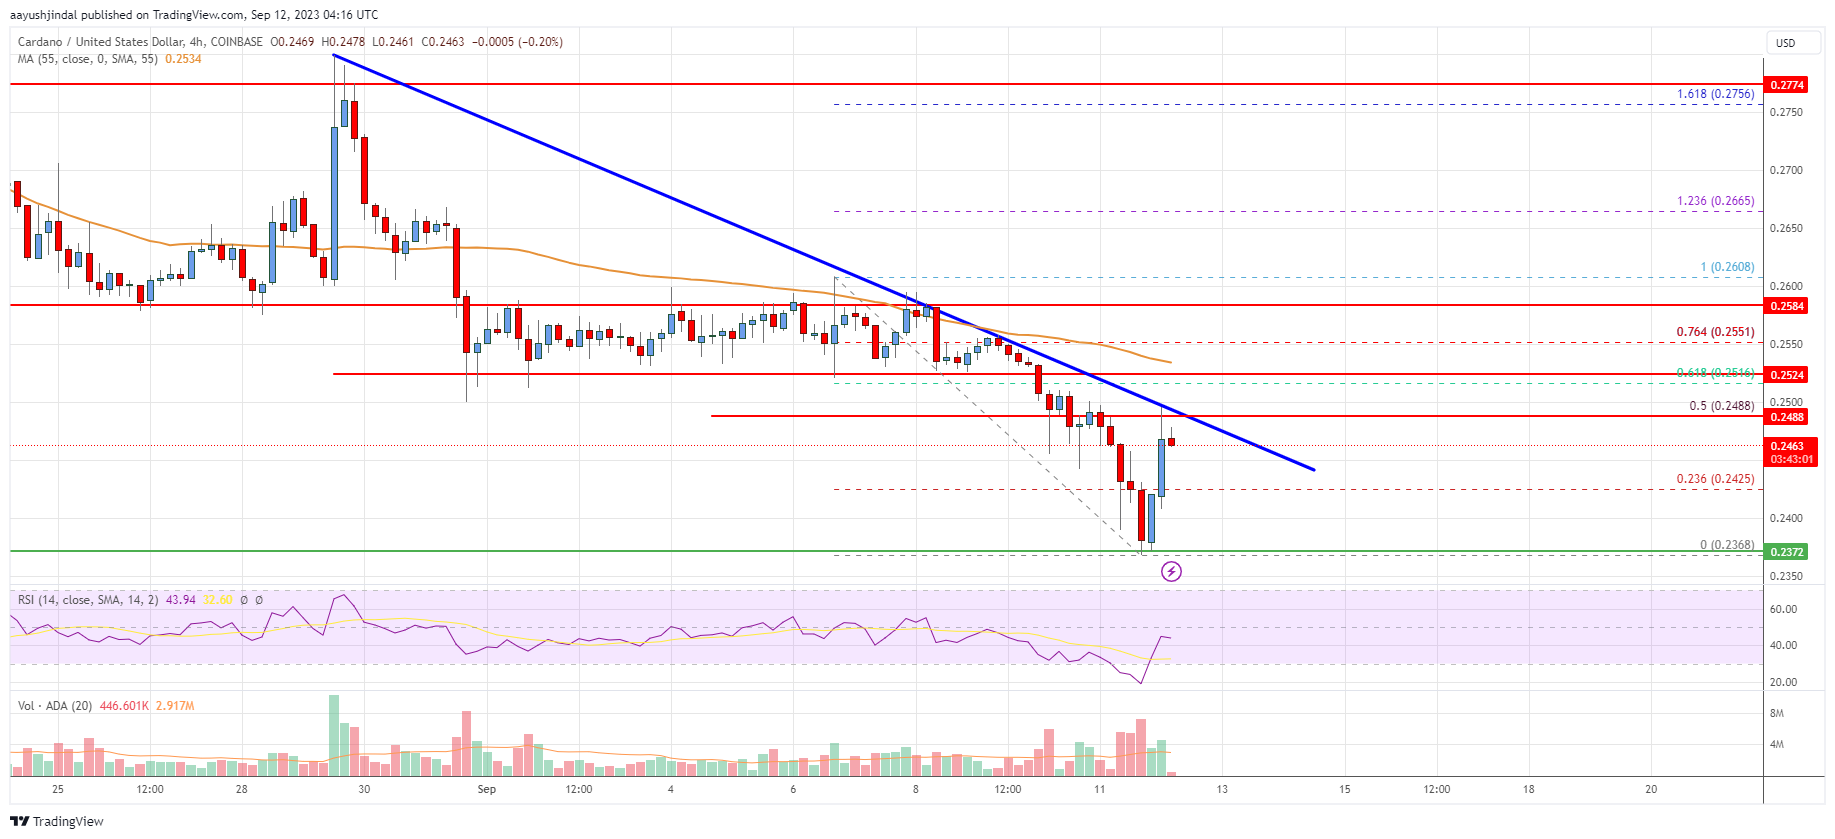 Cardano (ADA) Price Analysis: Support Turned Resistance At $0.255